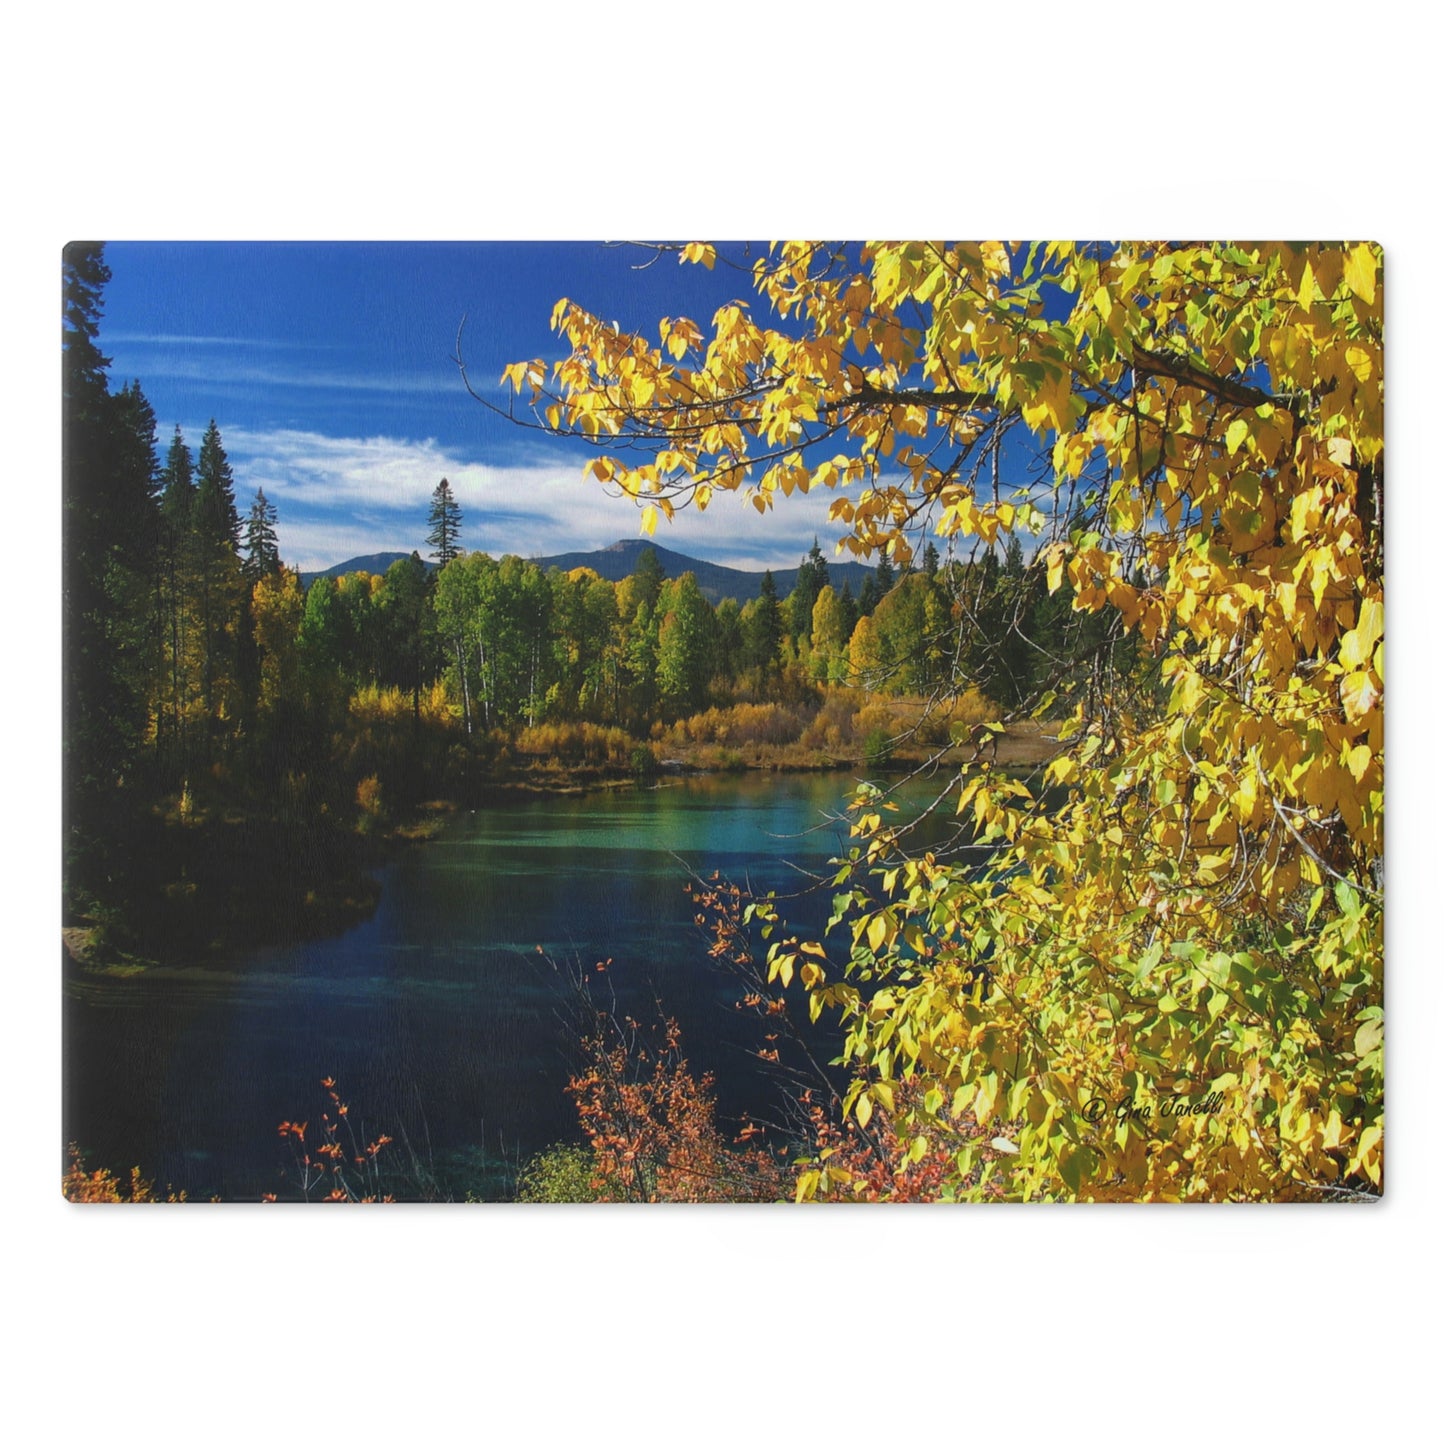 Wood River, Kimball State Park, Ft. Klamath Or.    Cutting Board